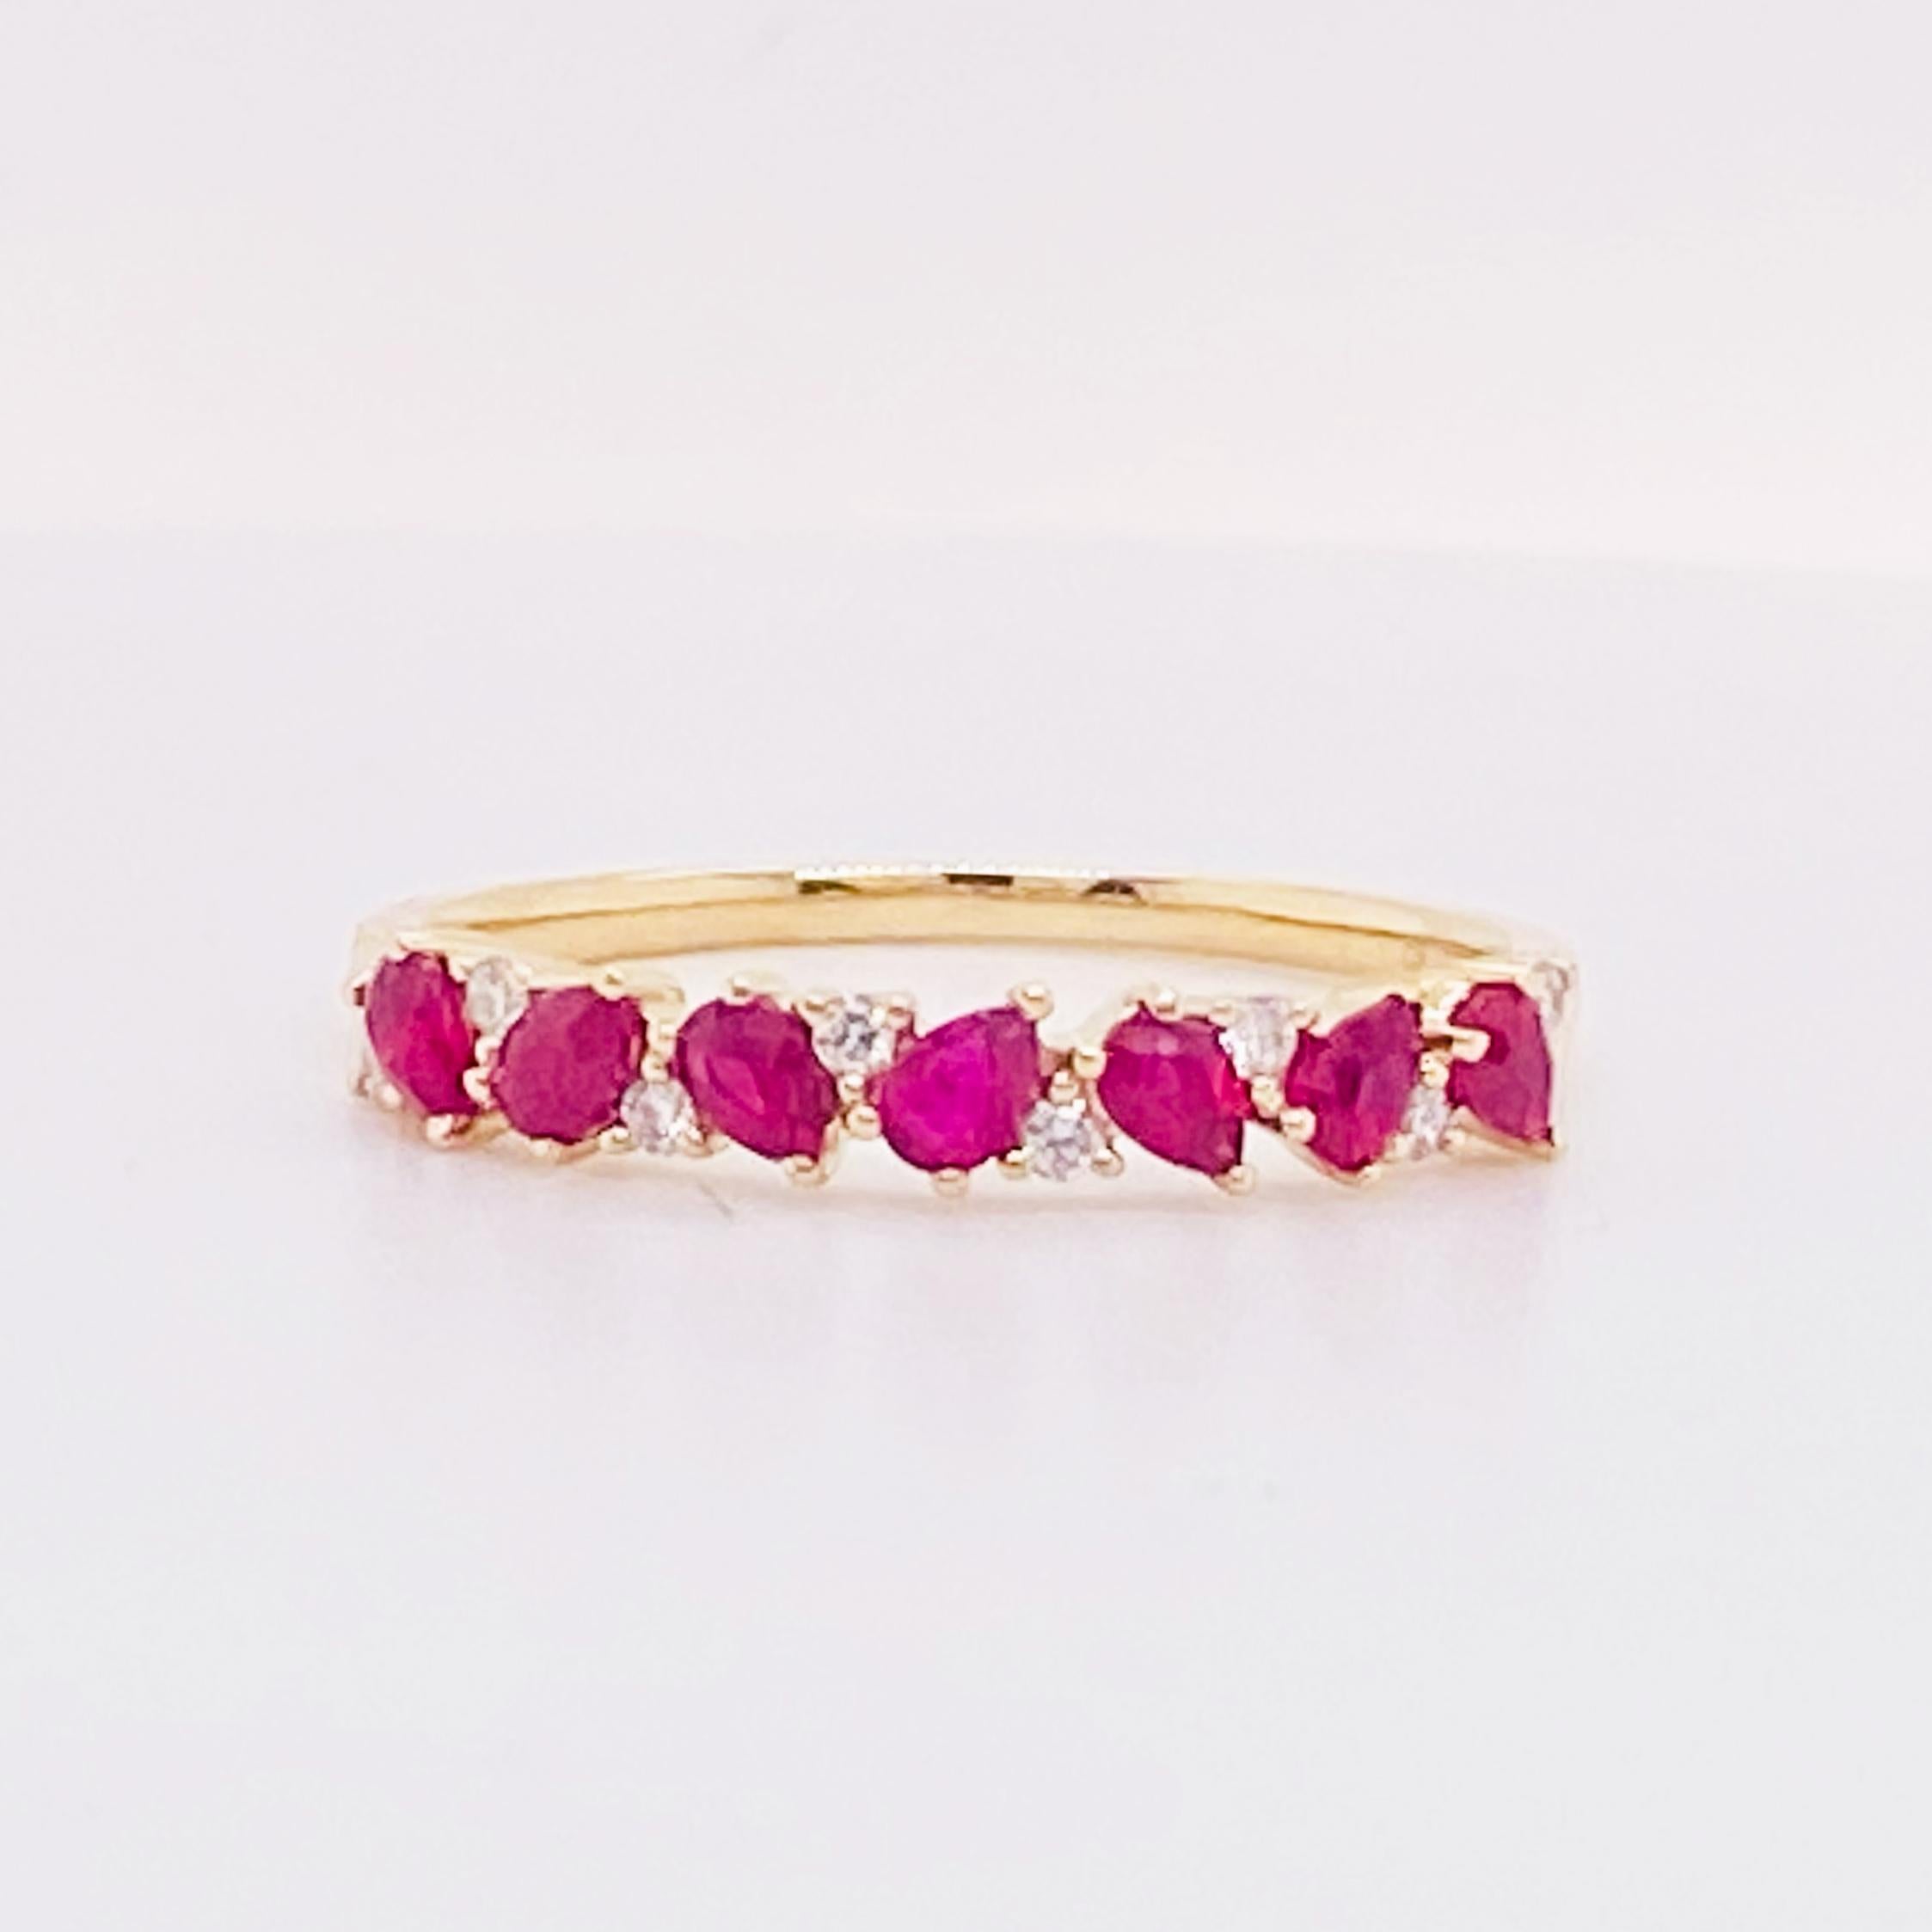 For Sale:  Ruby Diamond Band 14K Gold Pear Shape Ruby Interesting Stackable Band, Sizable 5